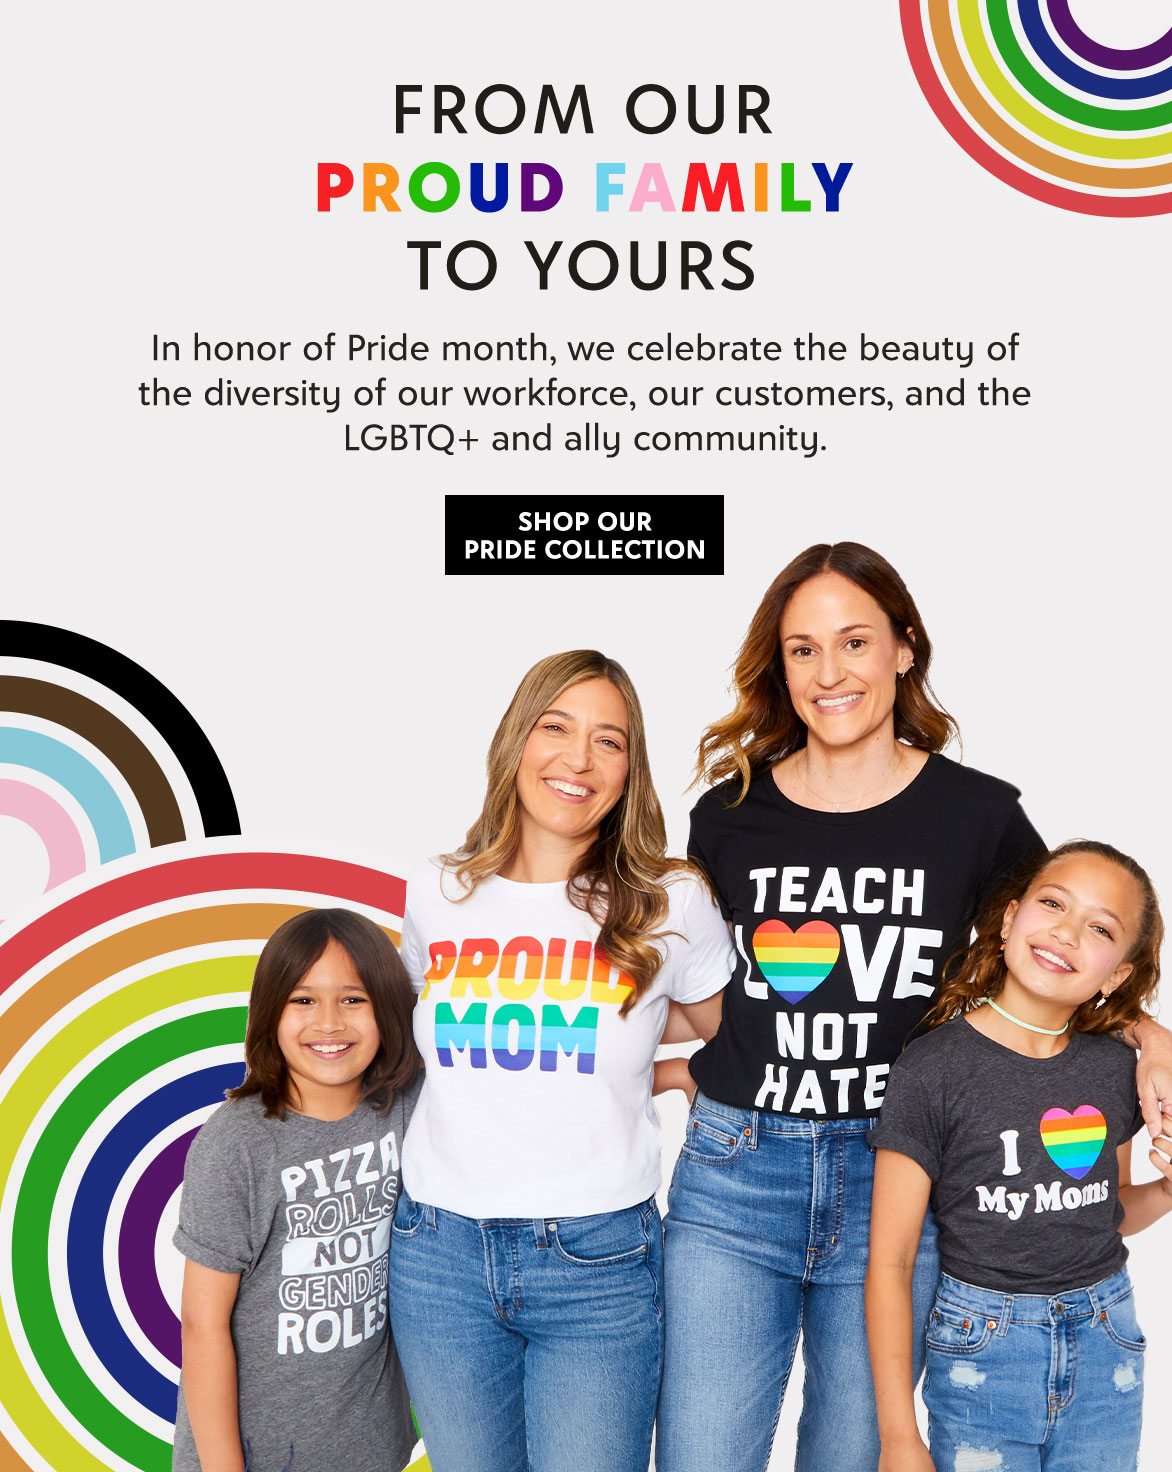 FROM OUR PROUD FAMILY TO YOURS – In honor of Pride month, we celebrate the beauty of the diversity of our workforce, our customers, and the LGBTQ+ and ally community. – SHOP OUR PRIDE COLLECTION